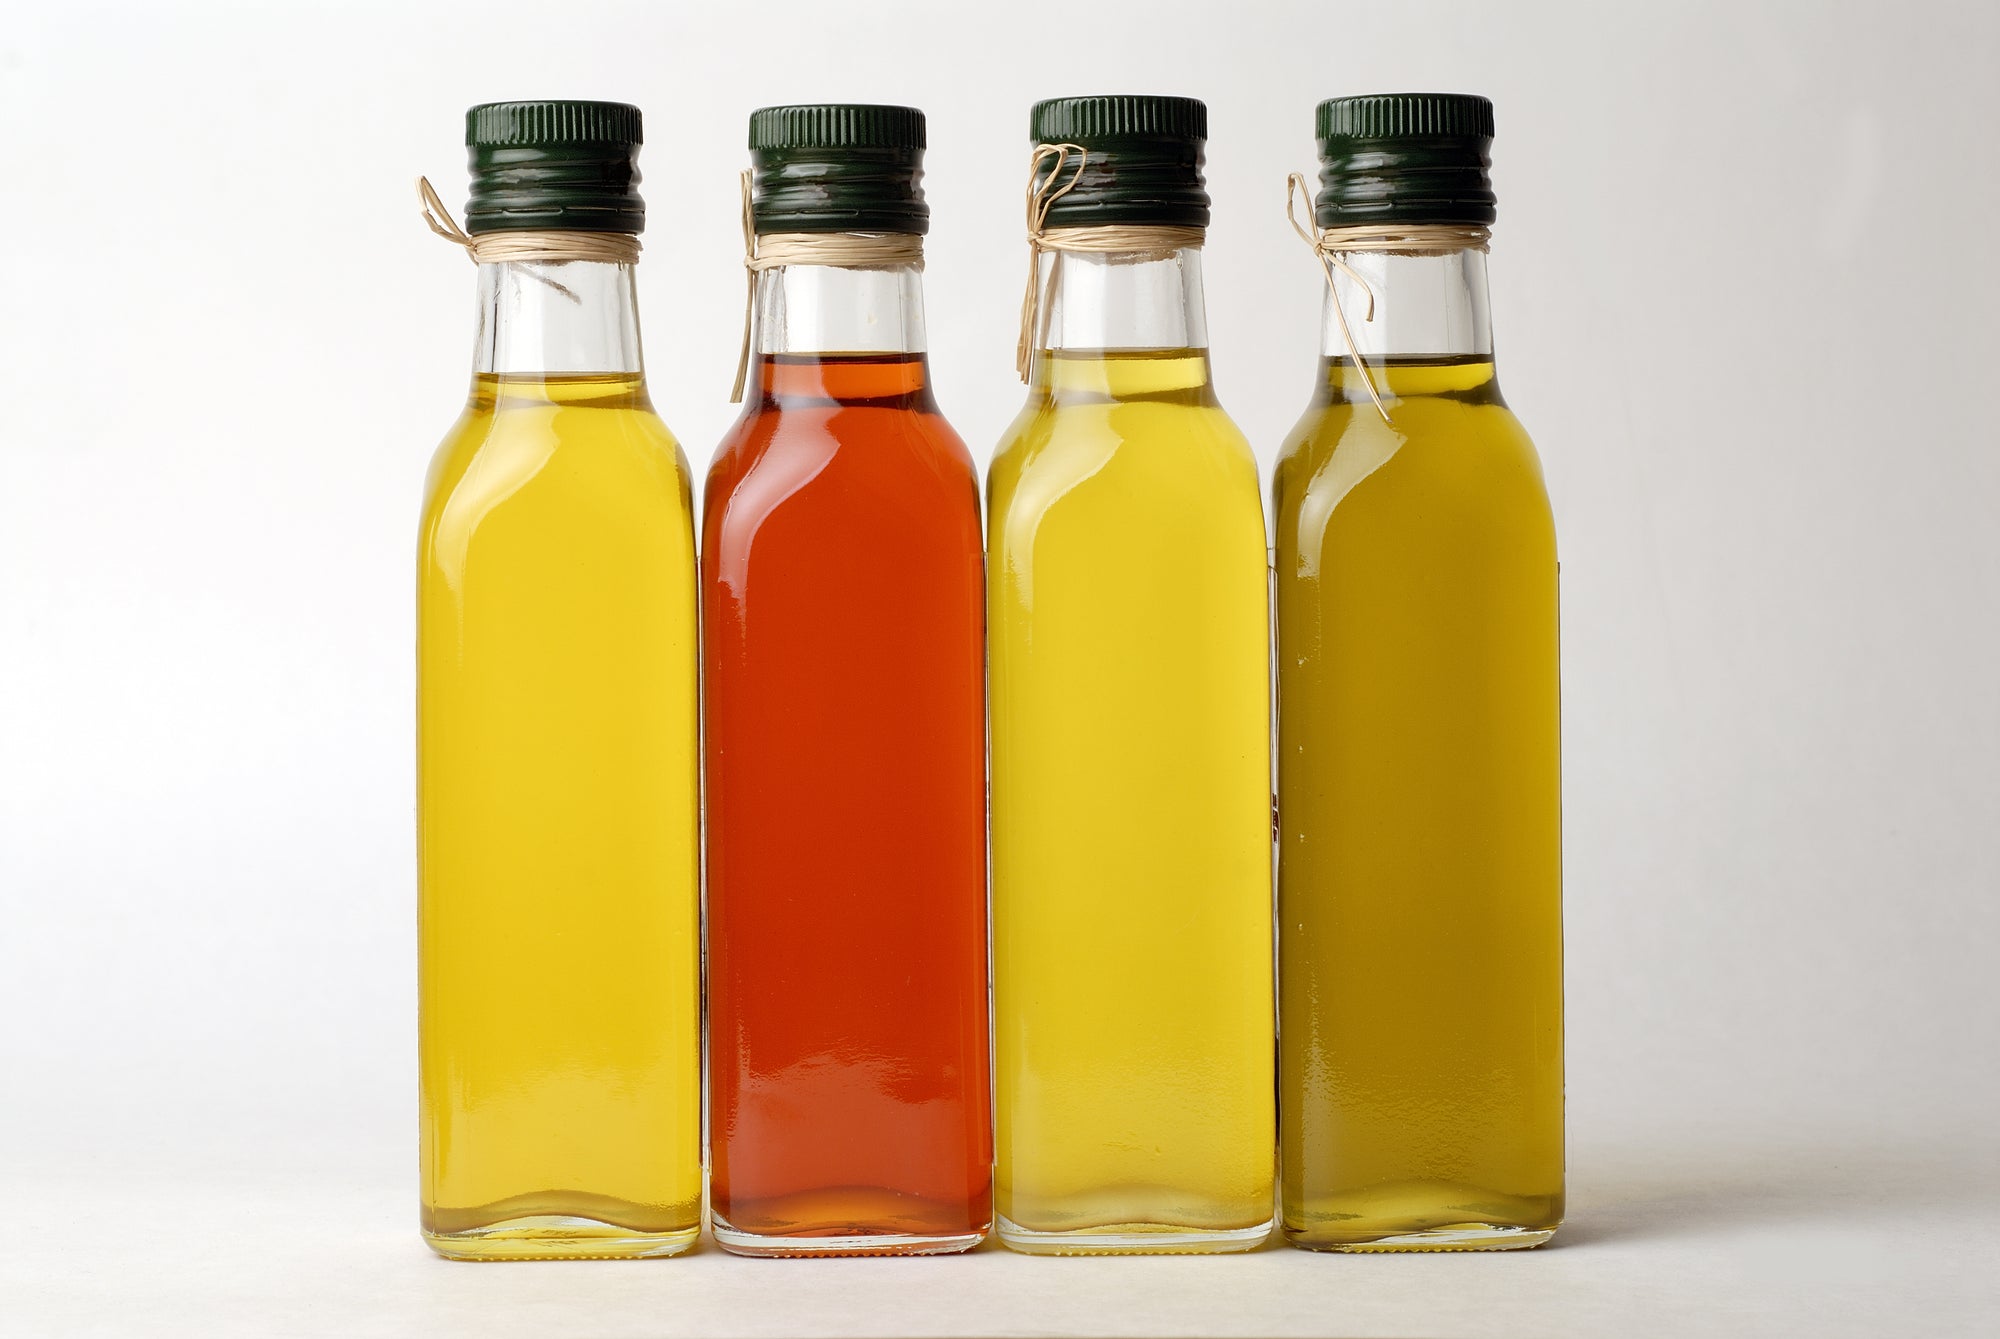 Cold Pressed Oils - Why You Should Switch to this Healthier Alternative